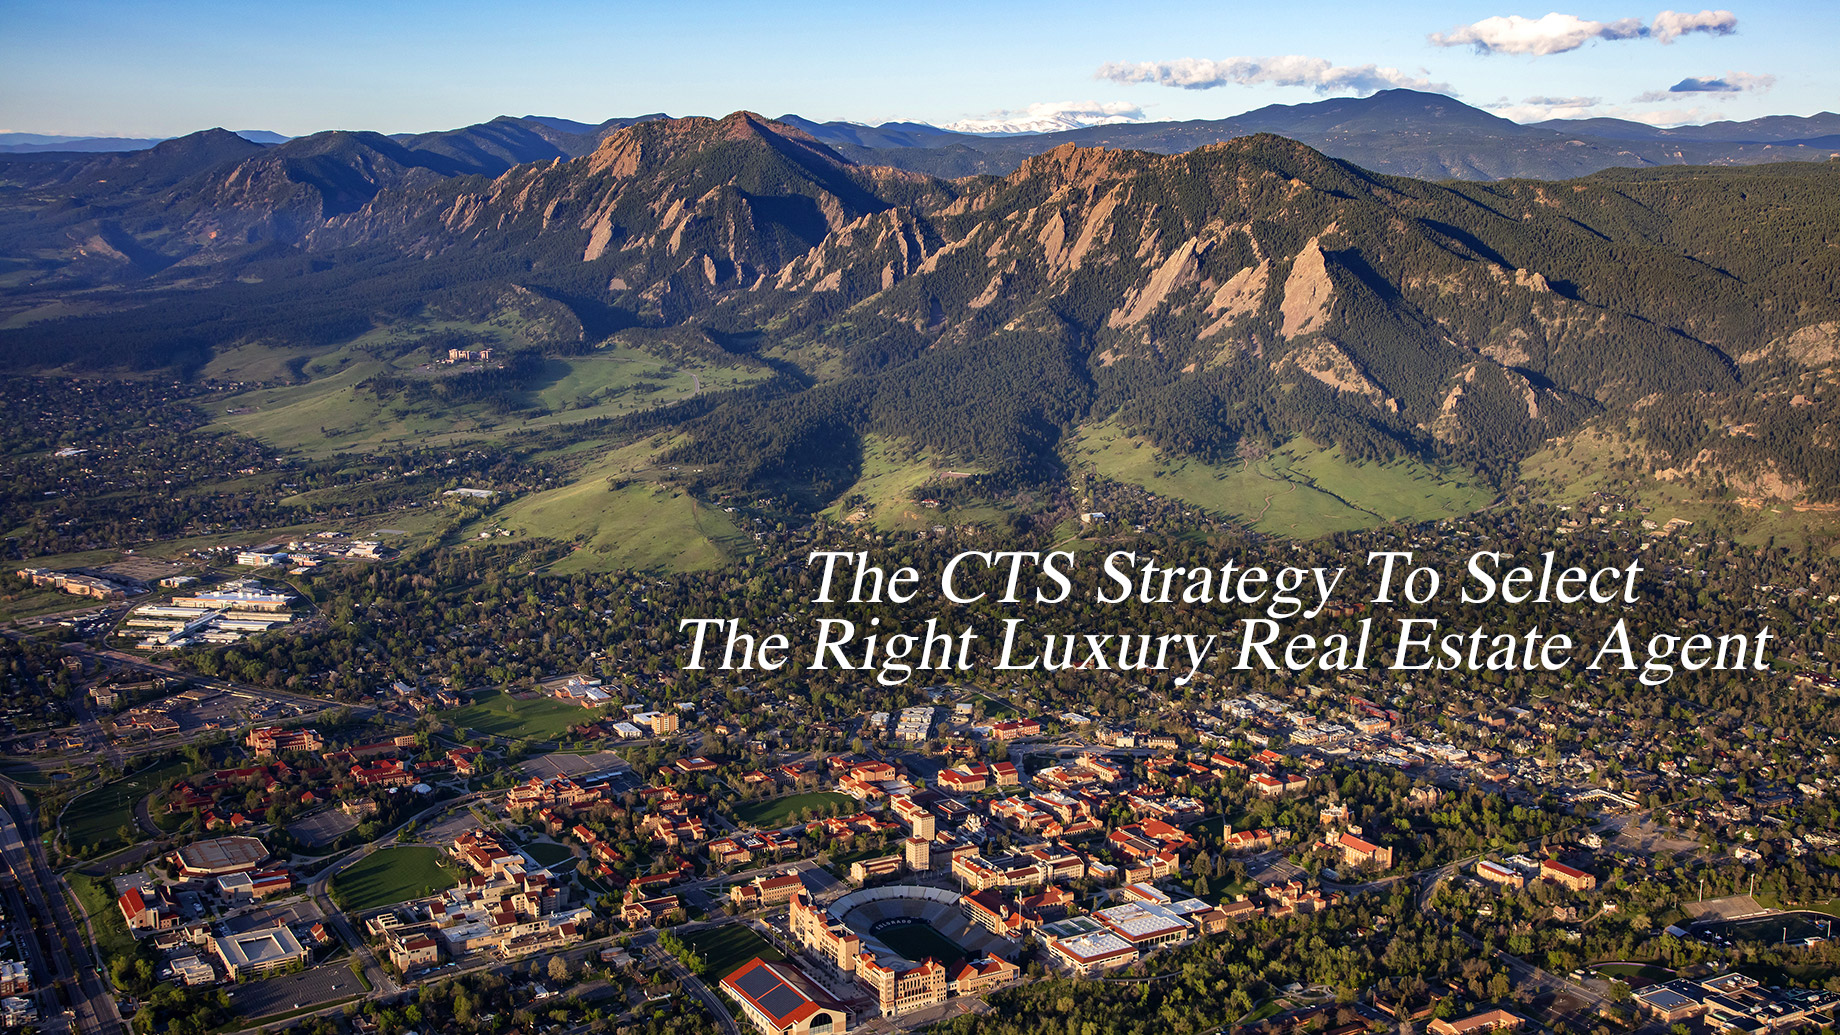 The CTS Strategy To Select The Right Luxury Real Estate Agent in Boulder, Colorado